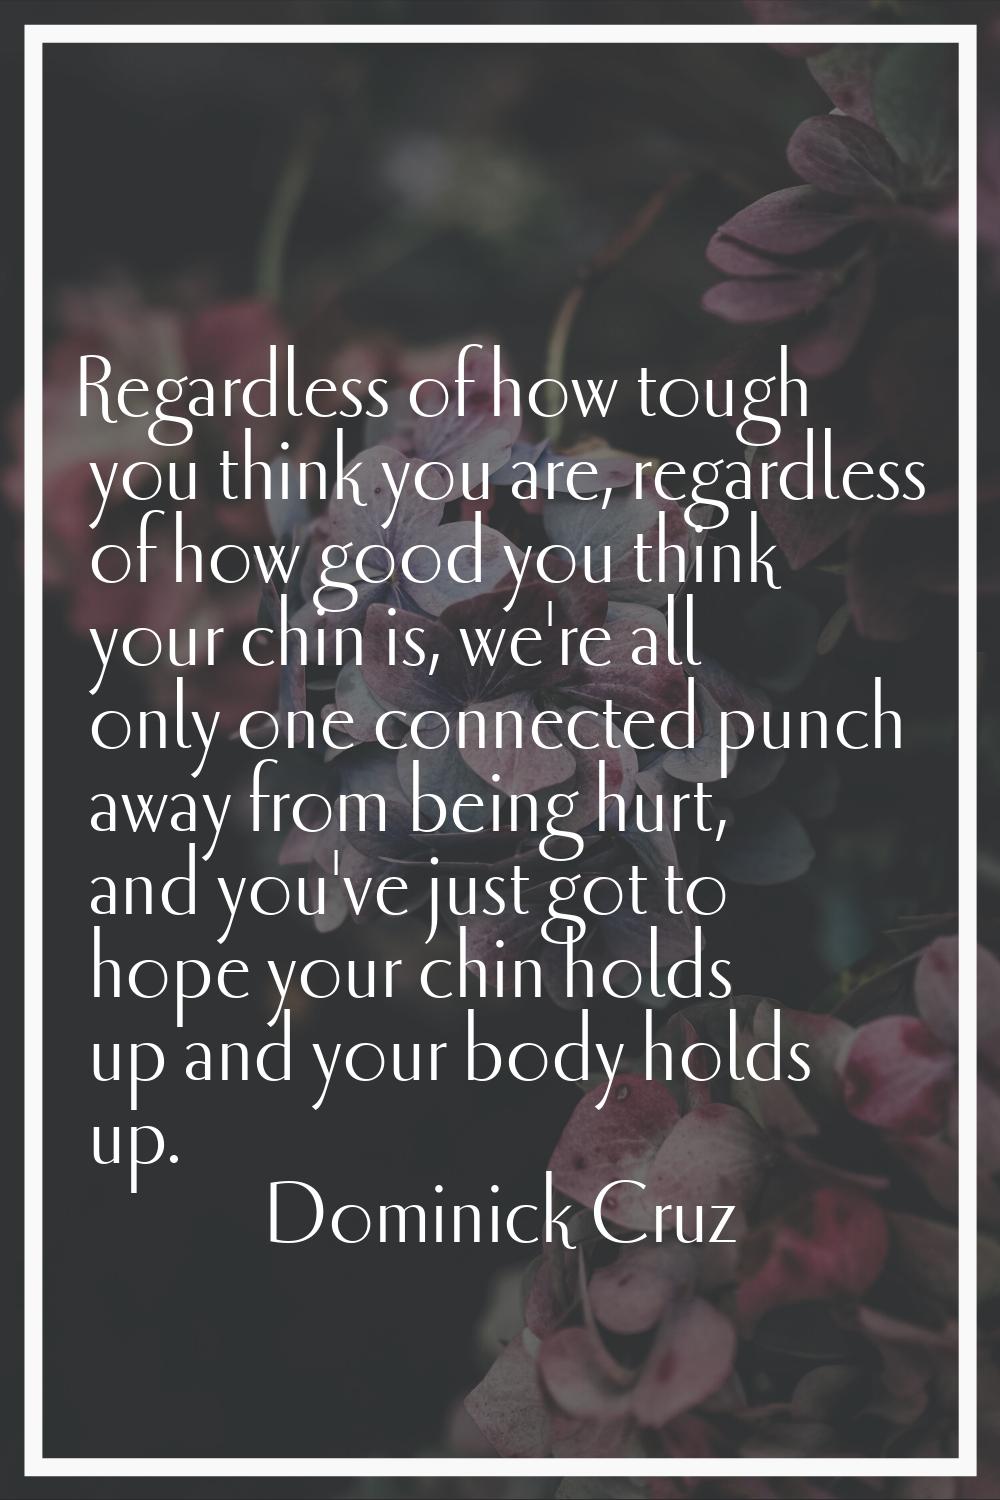 Regardless of how tough you think you are, regardless of how good you think your chin is, we're all